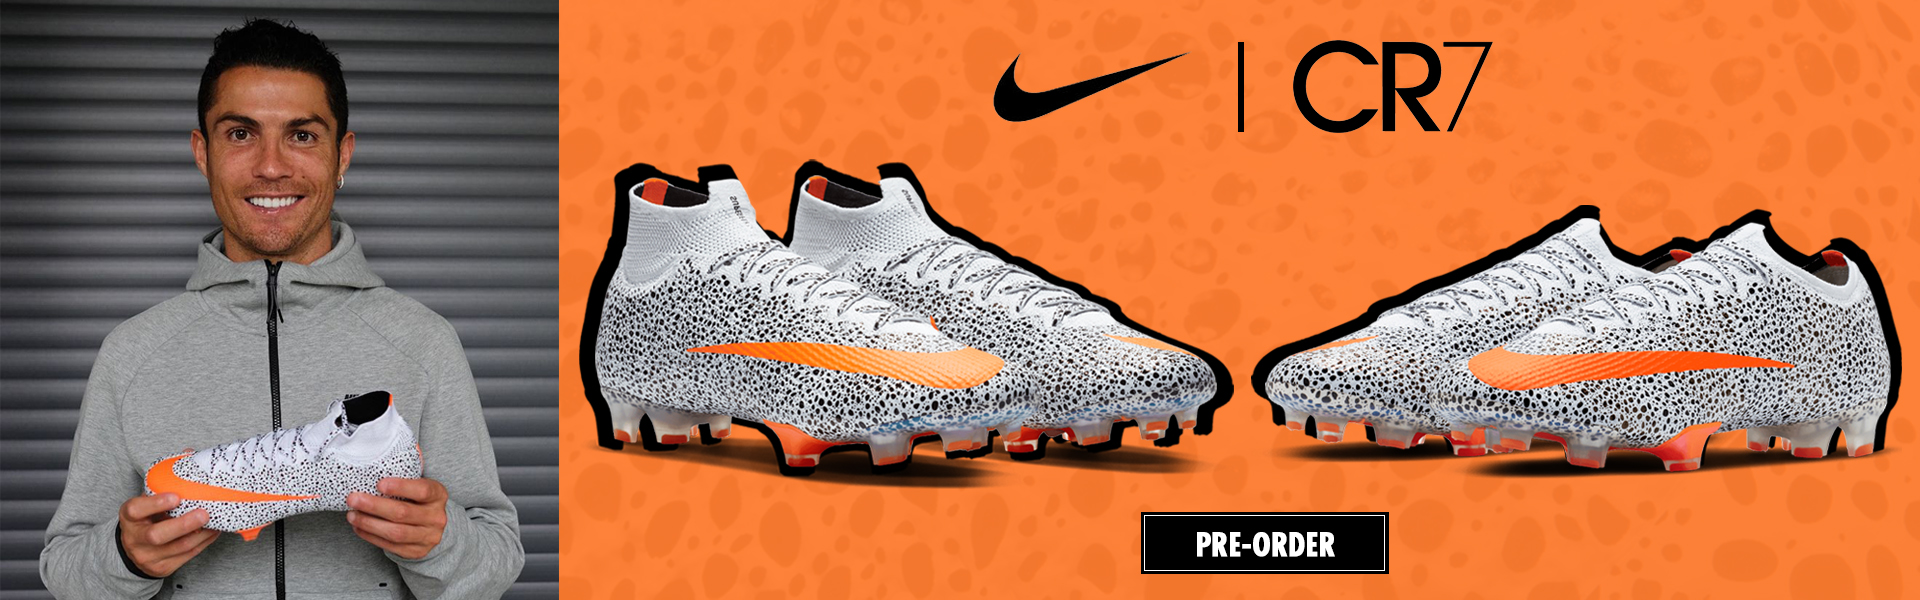 Nike CR7 Vapor 13 Academy MDS Turf Football Boots Review